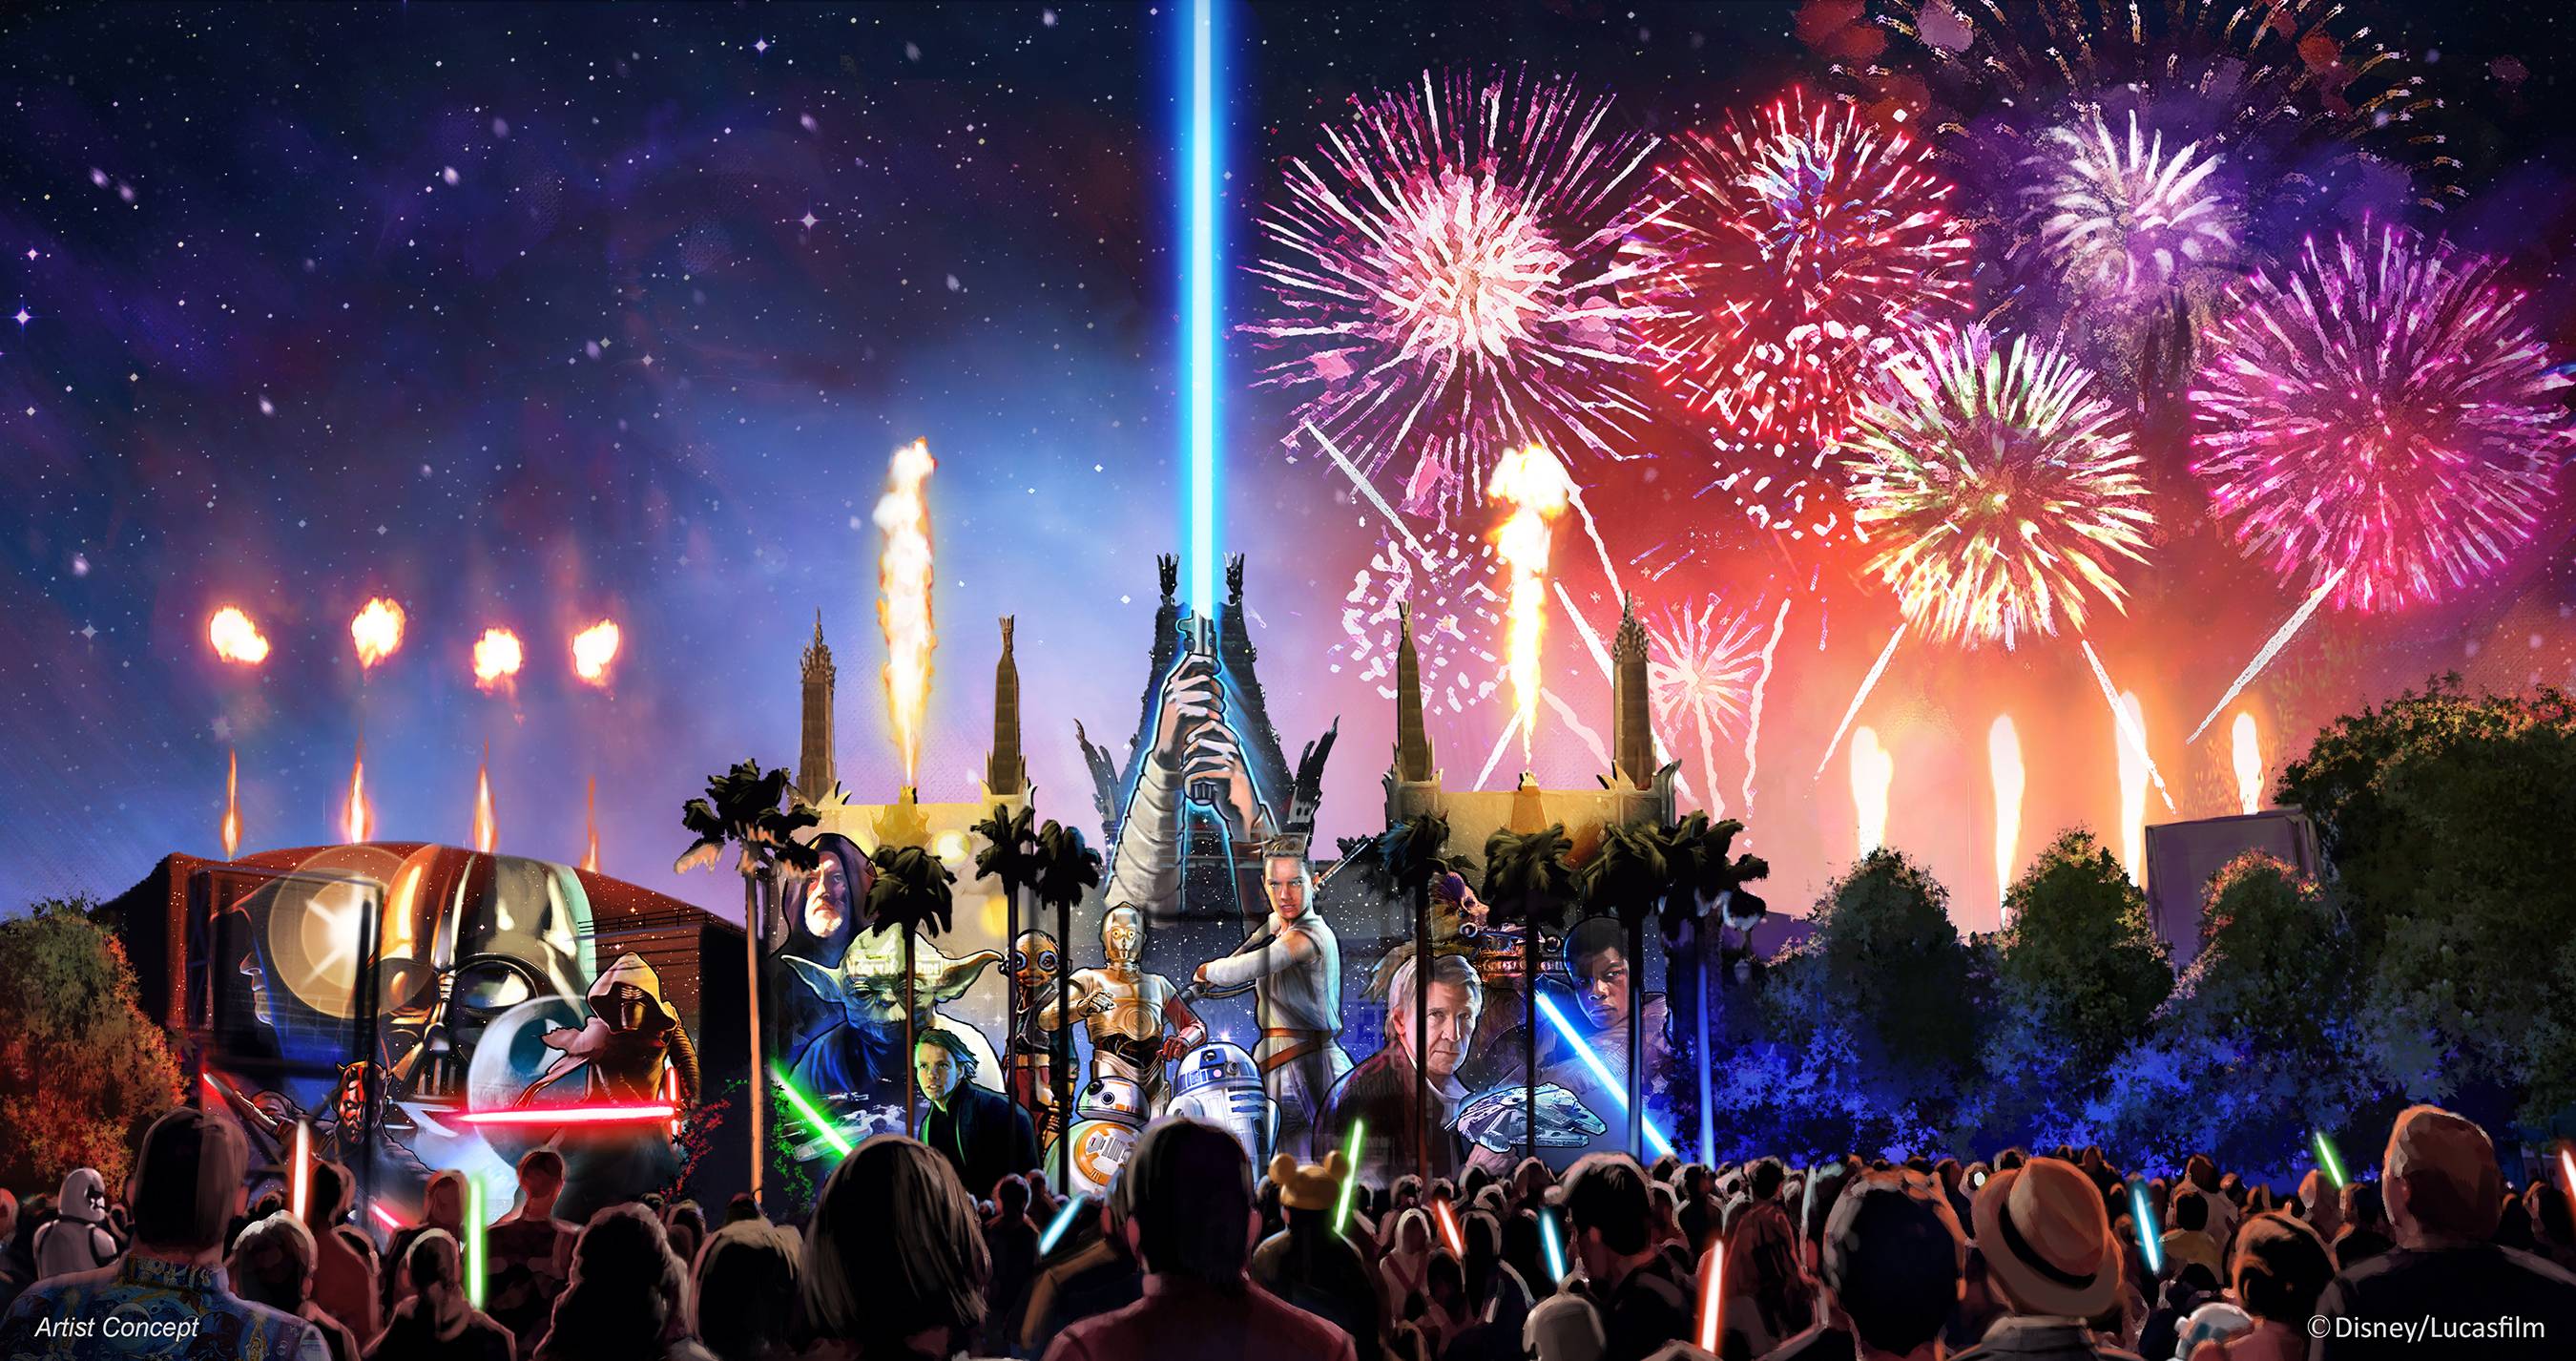 Star Wars A Galactic Spectacular to a take a break for the holidays